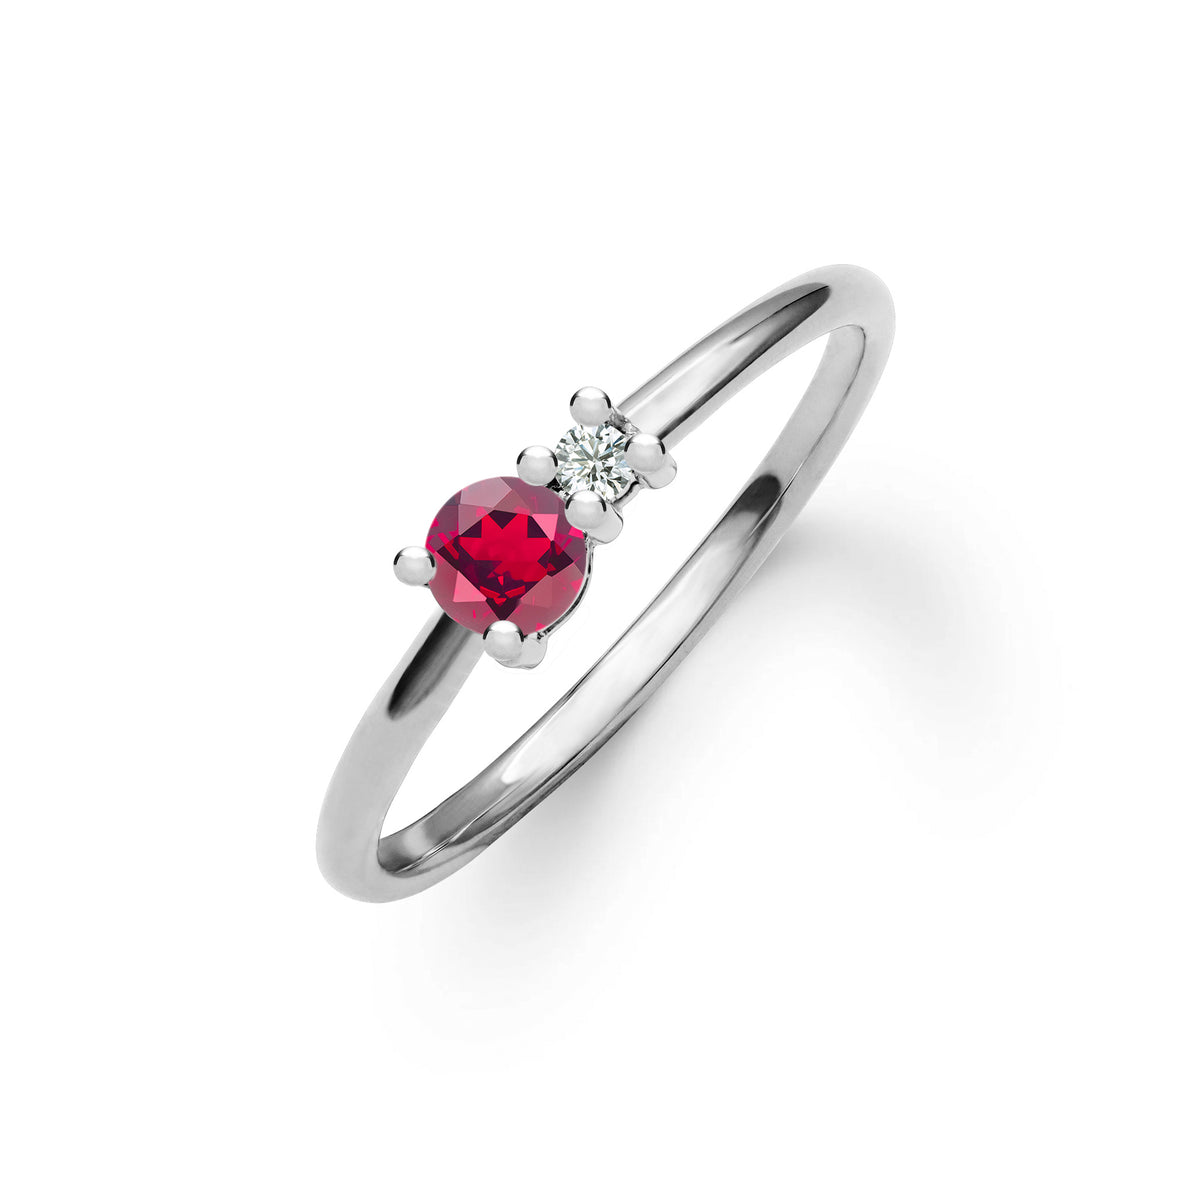 Rosecliff Ruby Stackable Ring in 14k Gold (July)